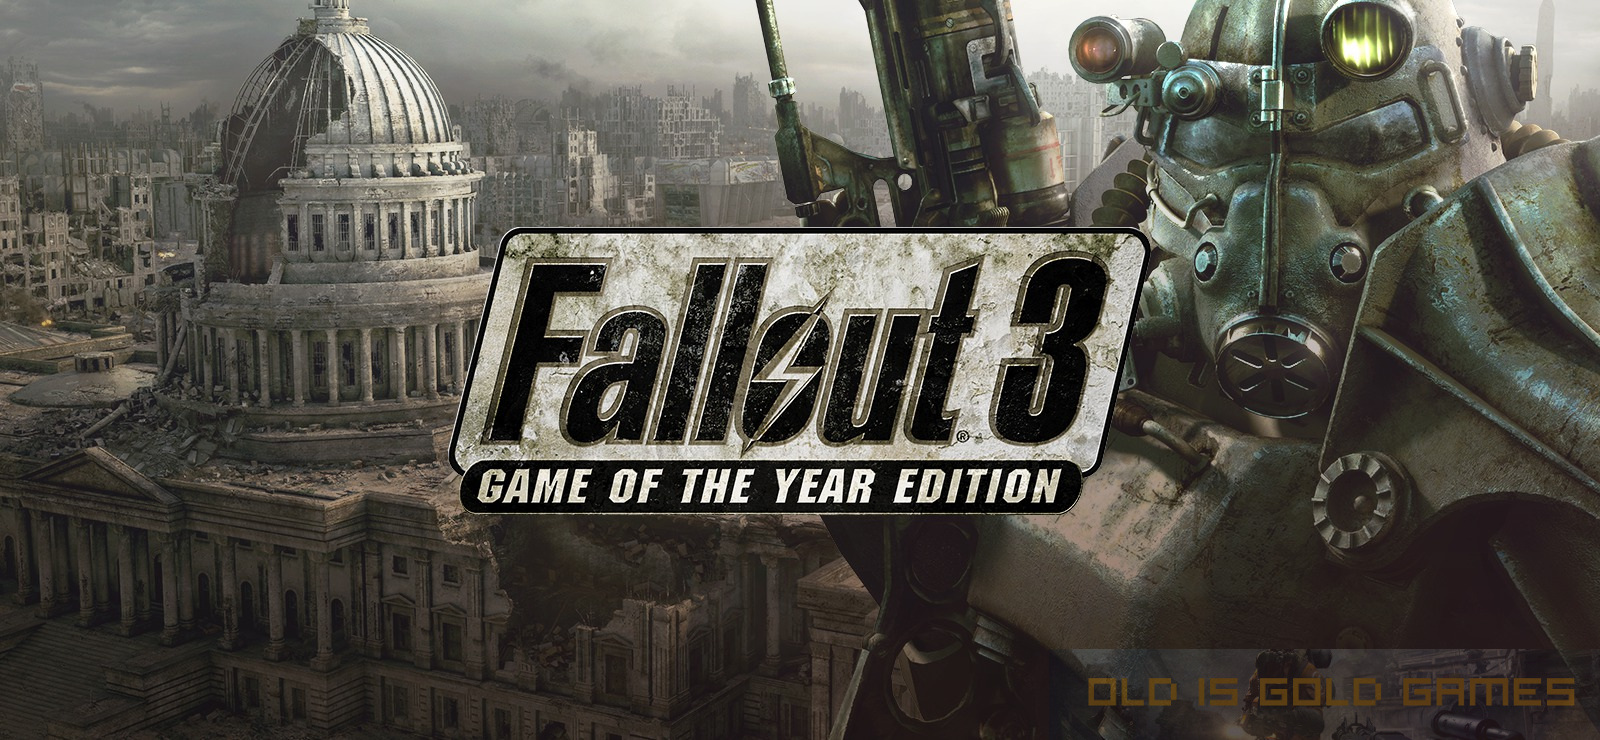 Fallout 3 Free Download